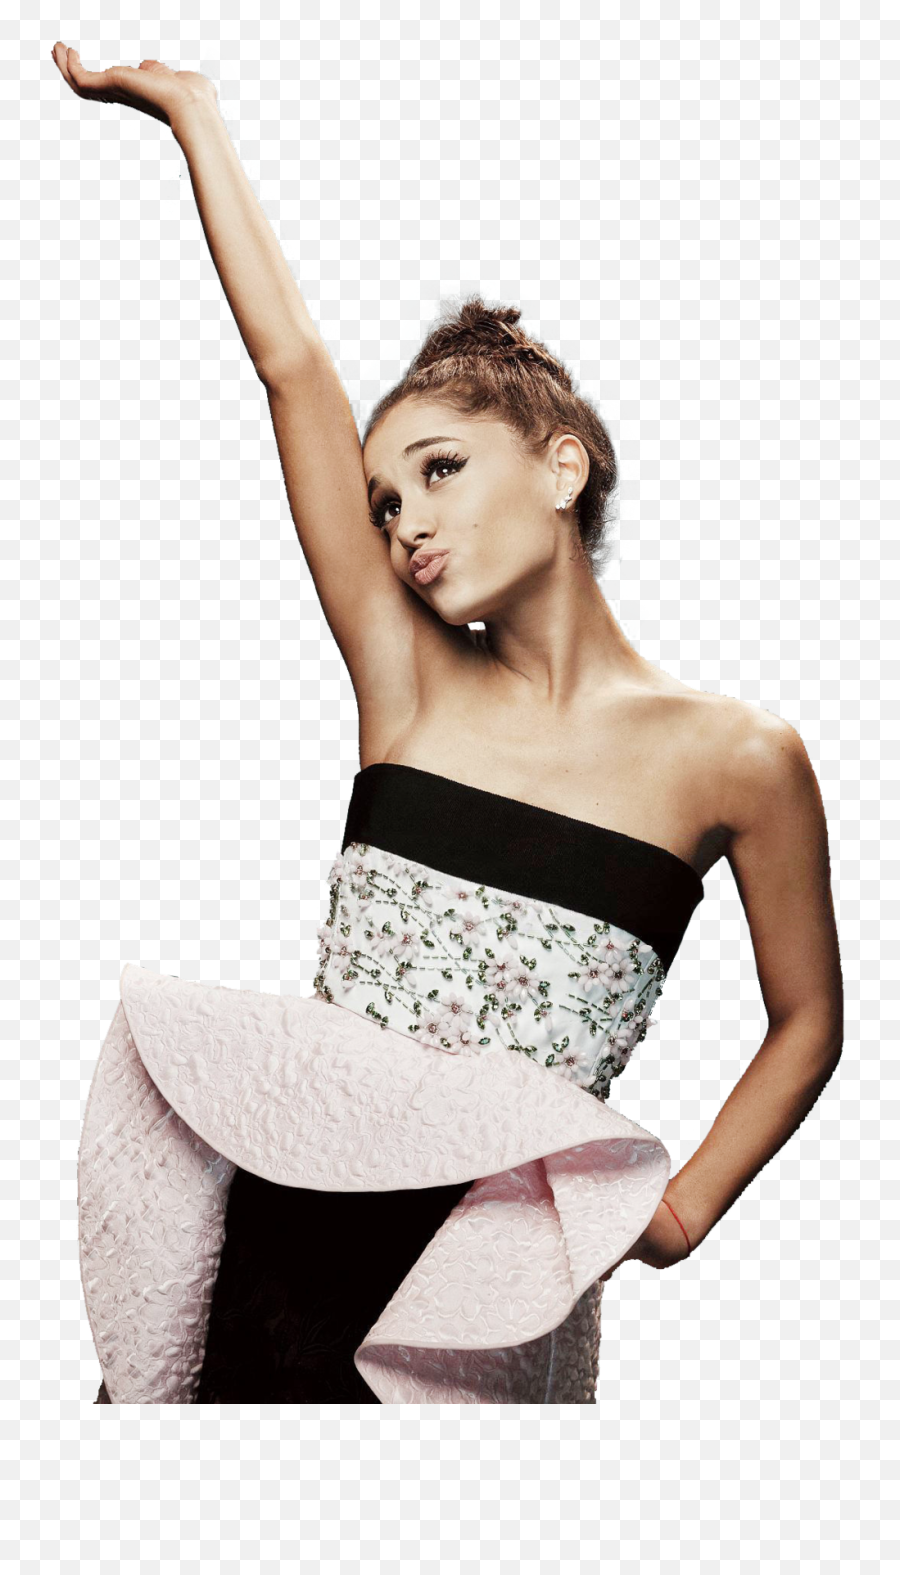 Ariana Grande Png Free Download - Ariana Grande Without Background,Ariana Grande Transparent Background